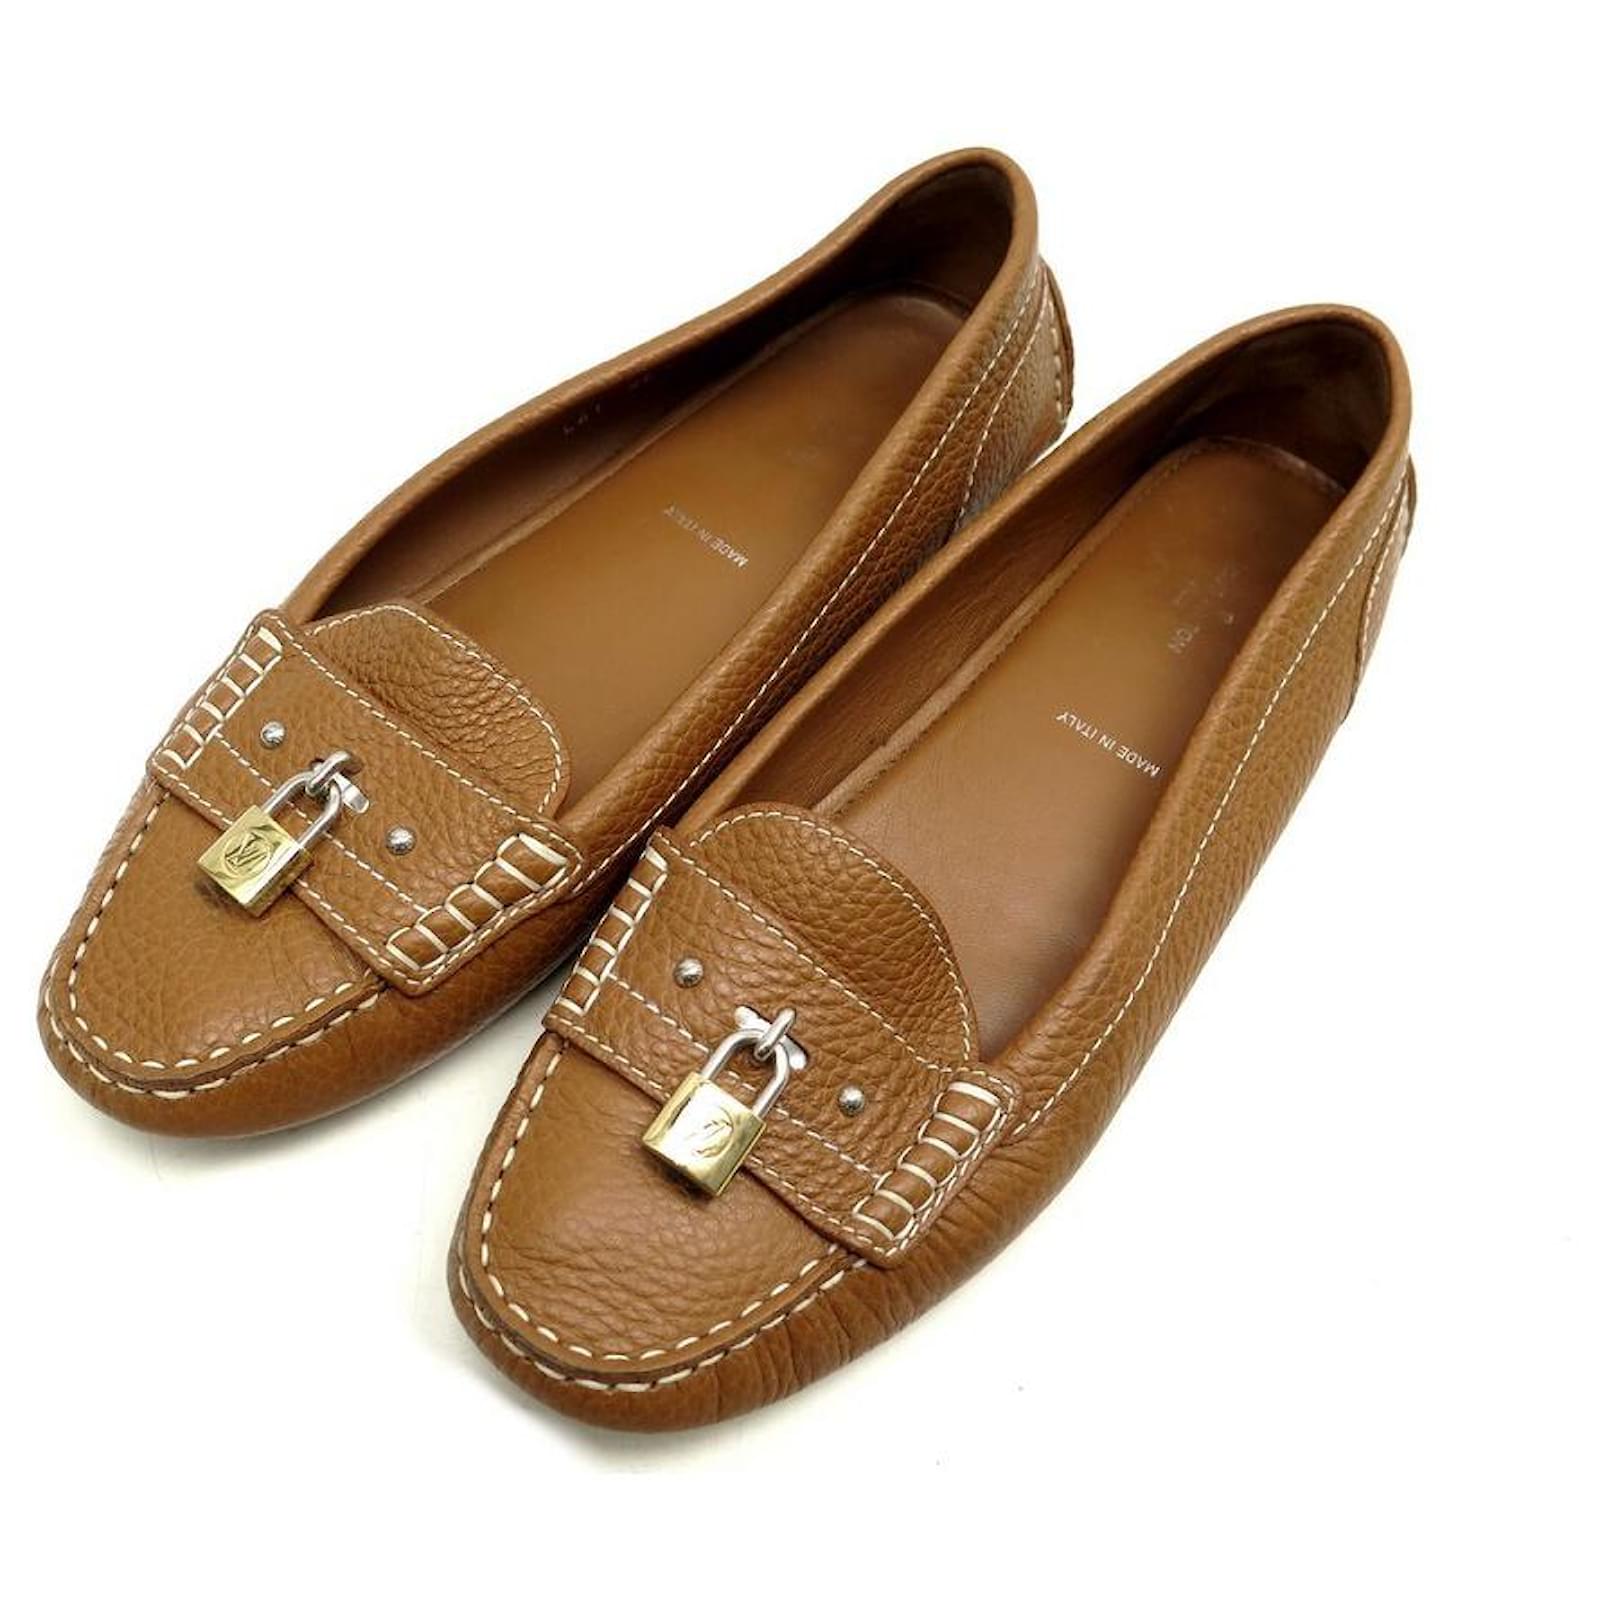 LOUIS VUITTON SHOES NOMADE MOCCASIN 38.5 CAMEL LEATHER LOAFERS